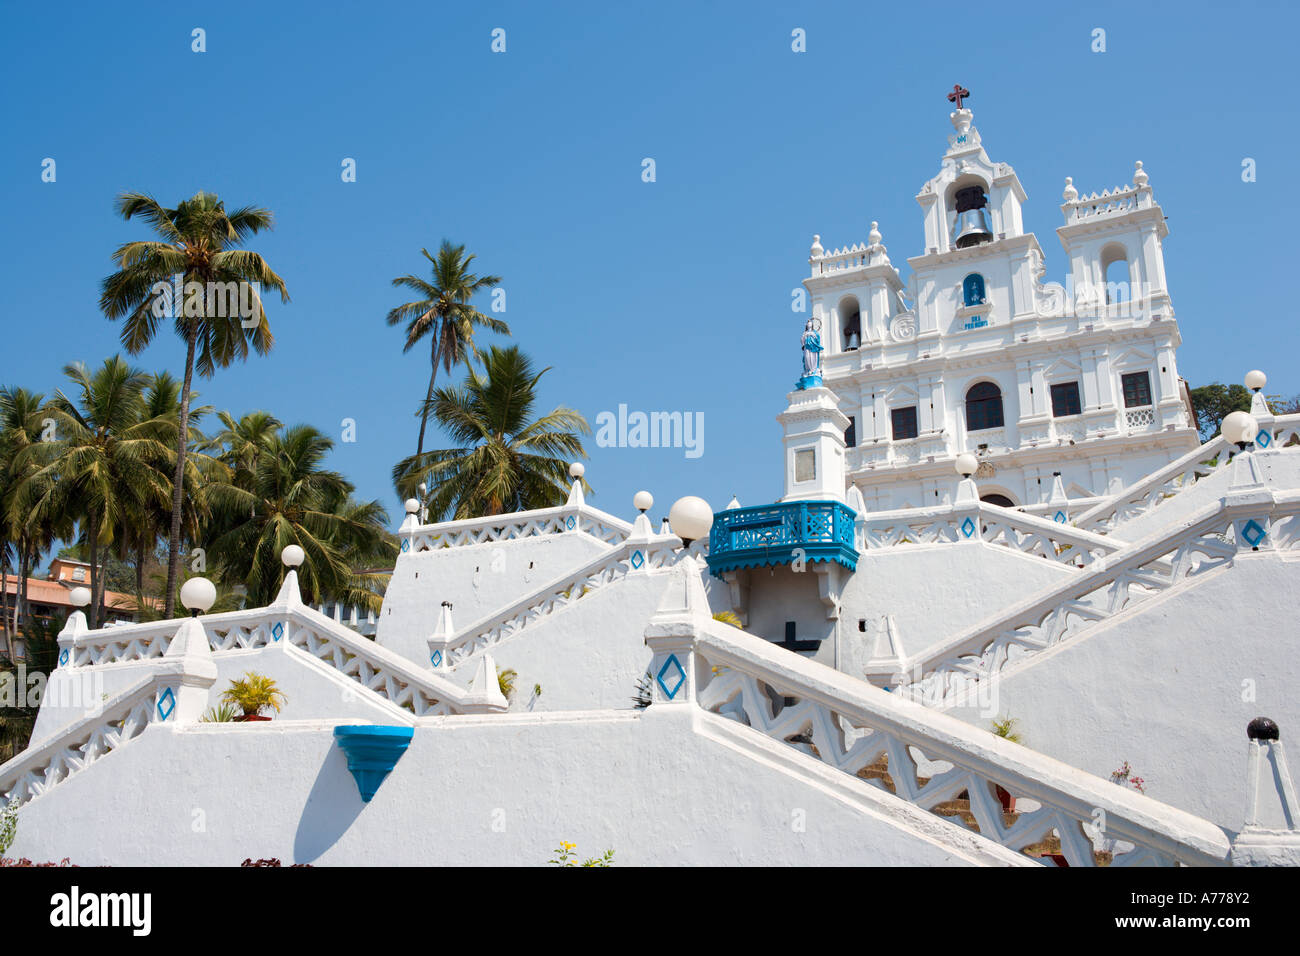 Baroque Church of Our Lady of the Immaculate Conception, Panaji or Panjim ( the Goan capital city), Goa, India Stock Photo